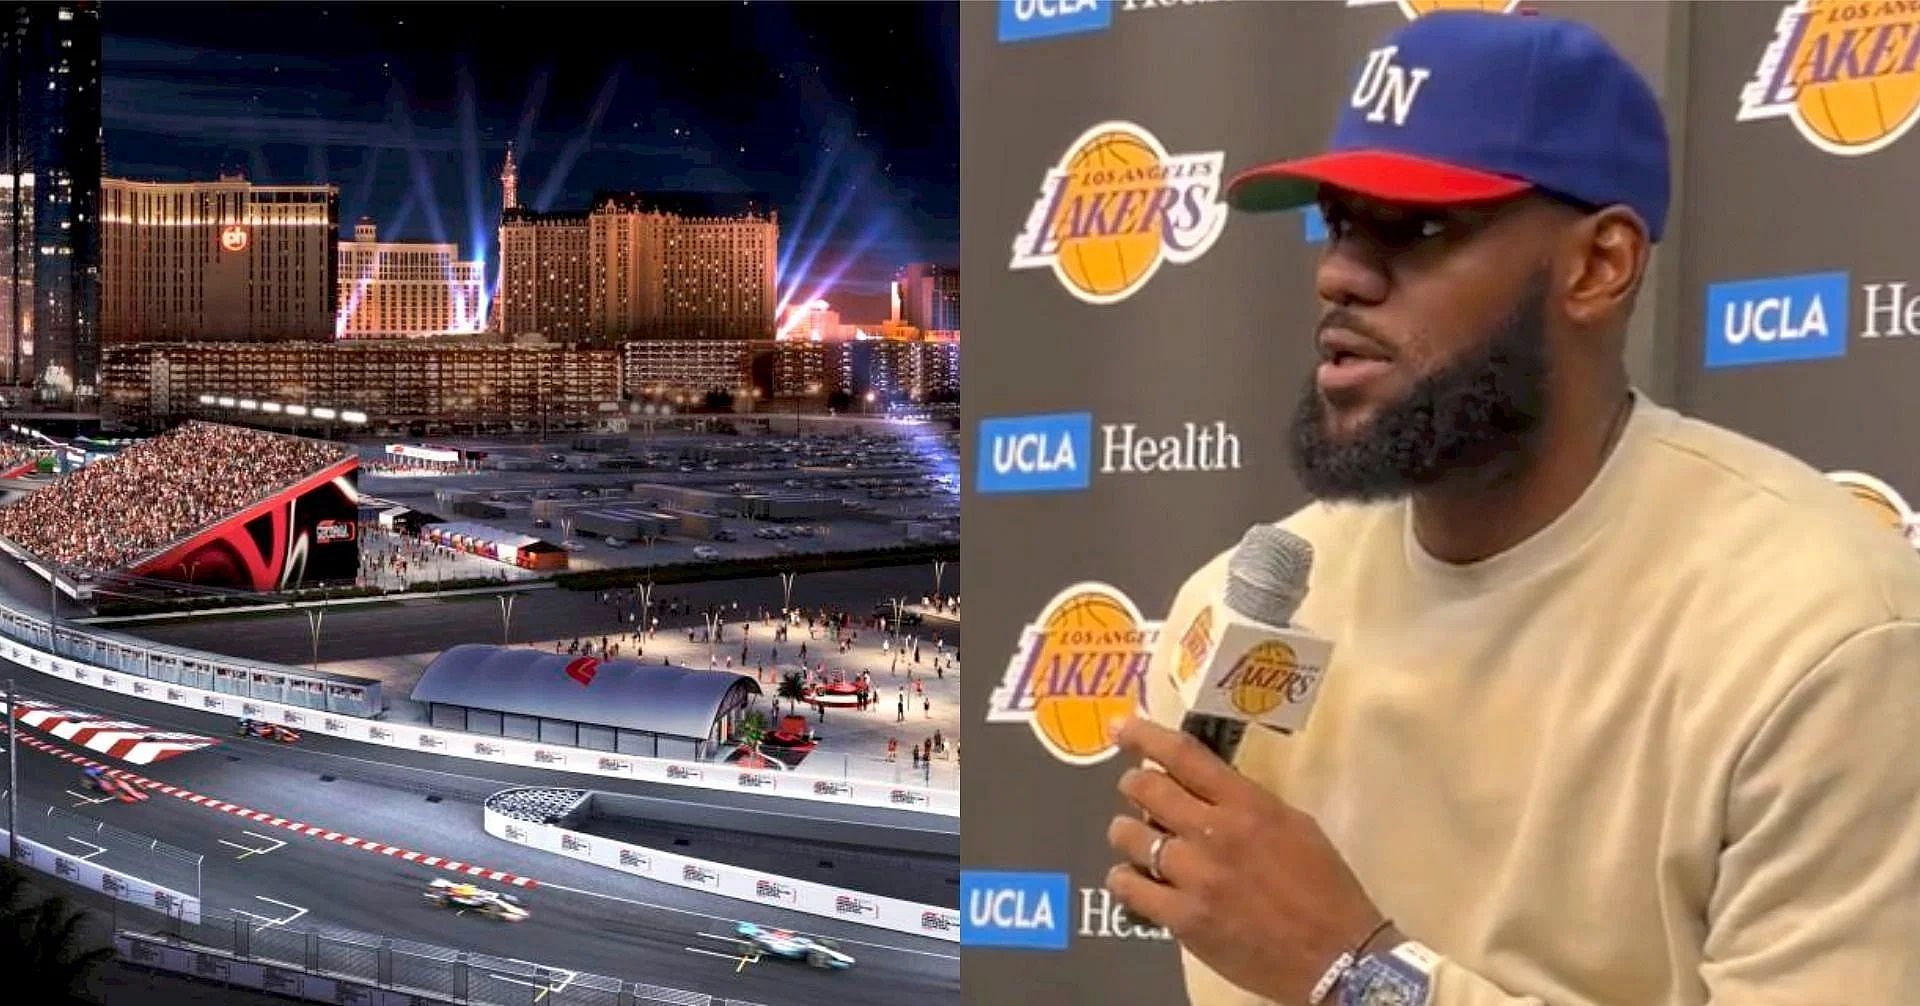 NBA superstar LeBron James hints anew at wanting to own an NBA team in Las Vegas.